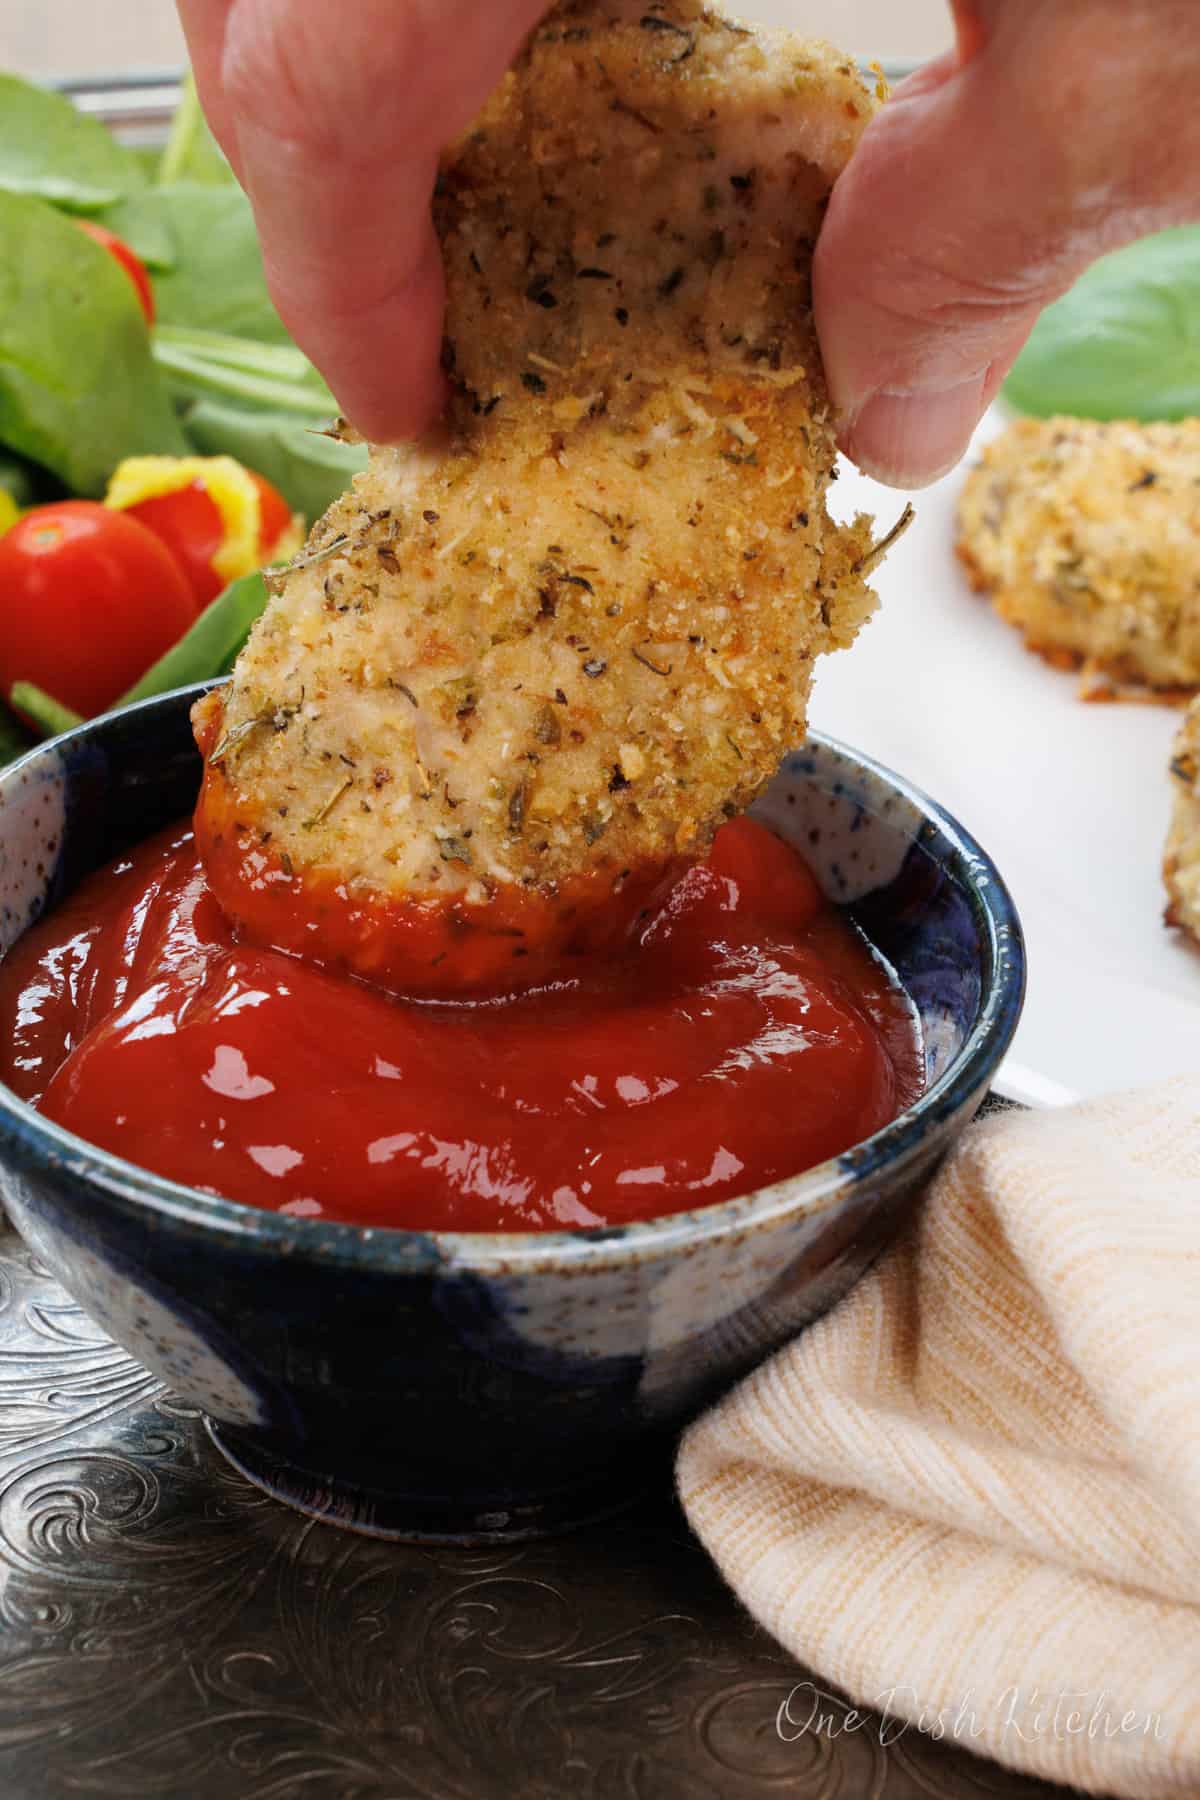 one chicken tender being dipped in a bowl of ketchup